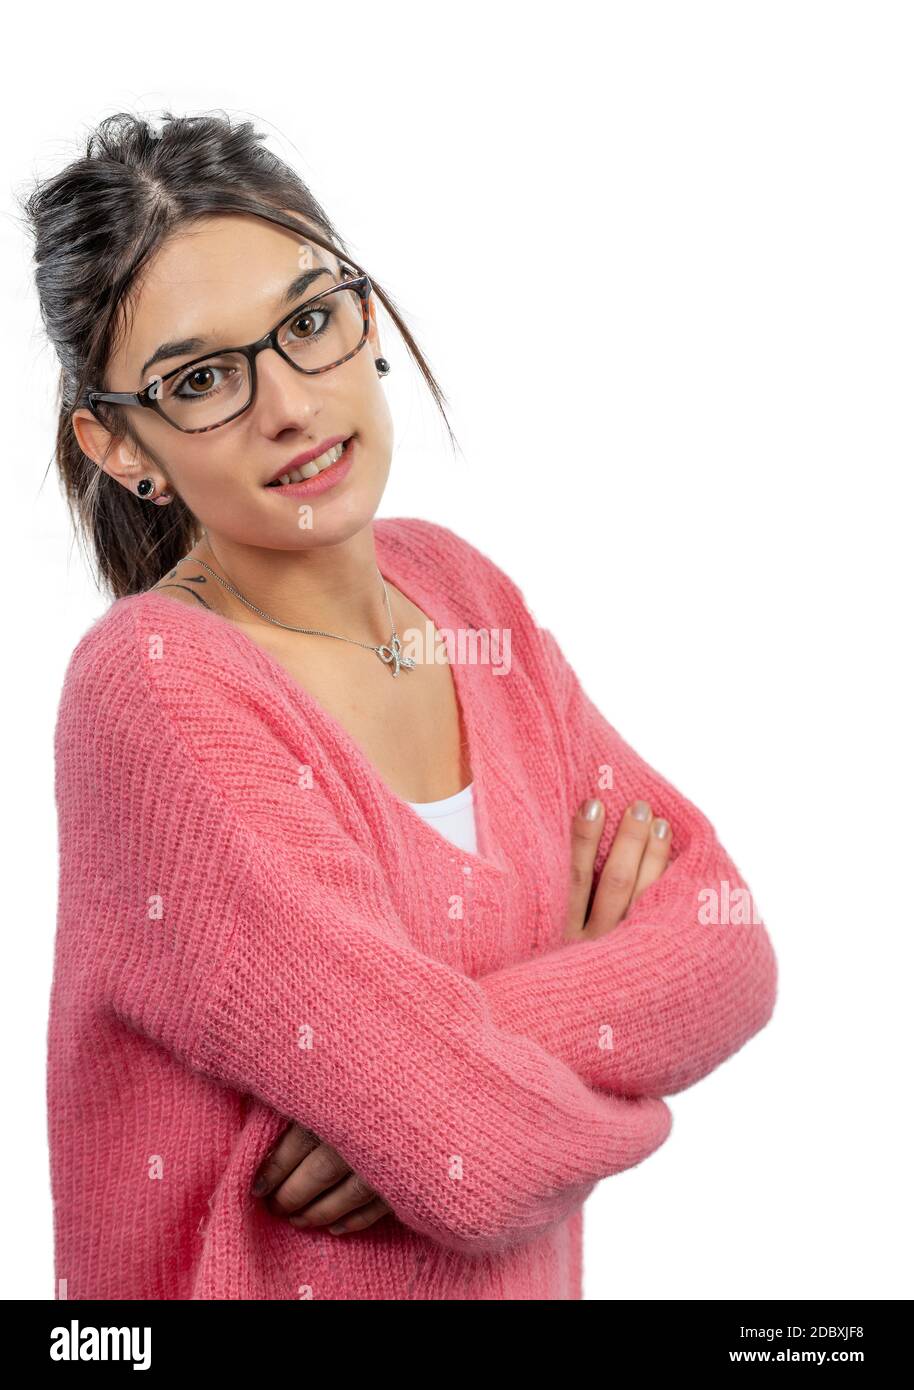 young smiling brunette woman with a pink sweater isolated on white background Stock Photo